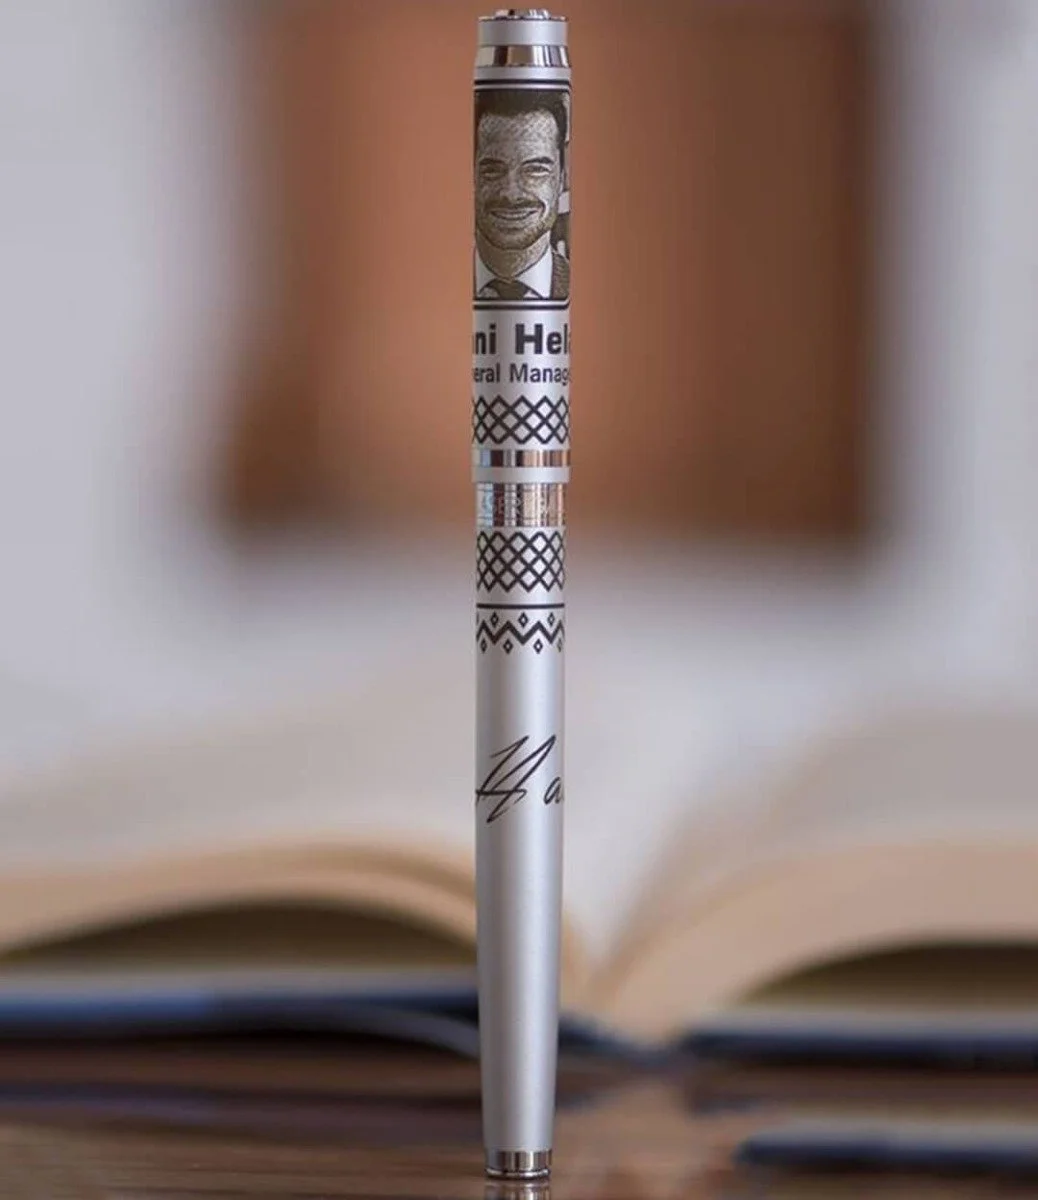 The Only Pen - 360 Degree With A Customized Name